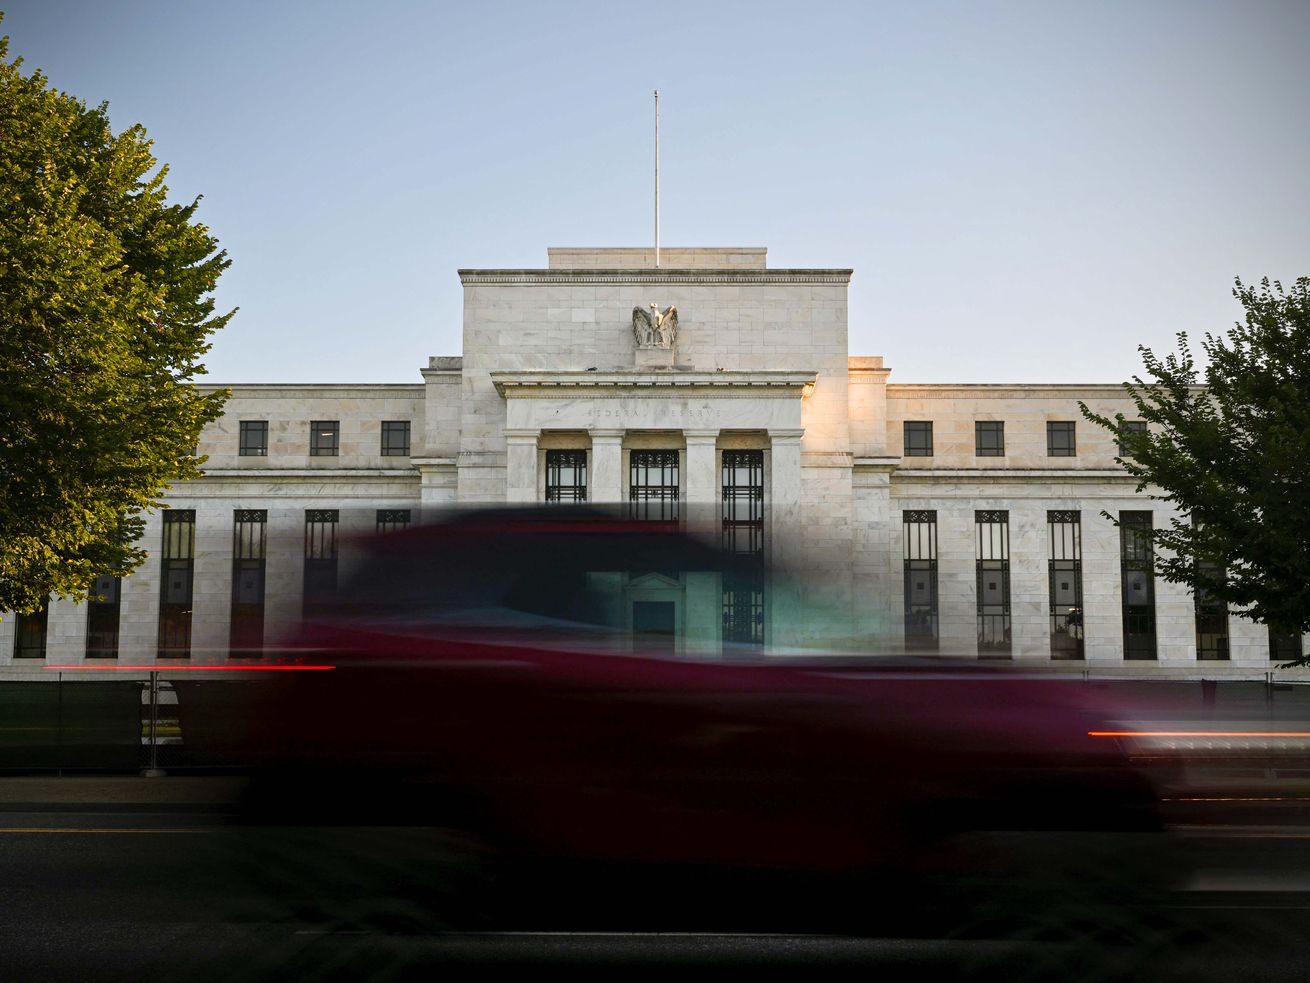 A time-lapse photo shows the Federal Reserve building, a white stone-fronted building with tall columns and vertical windows, as a blurred stream of traffic passes in front of it and the sunlight on the surrounding trees moves slowly.